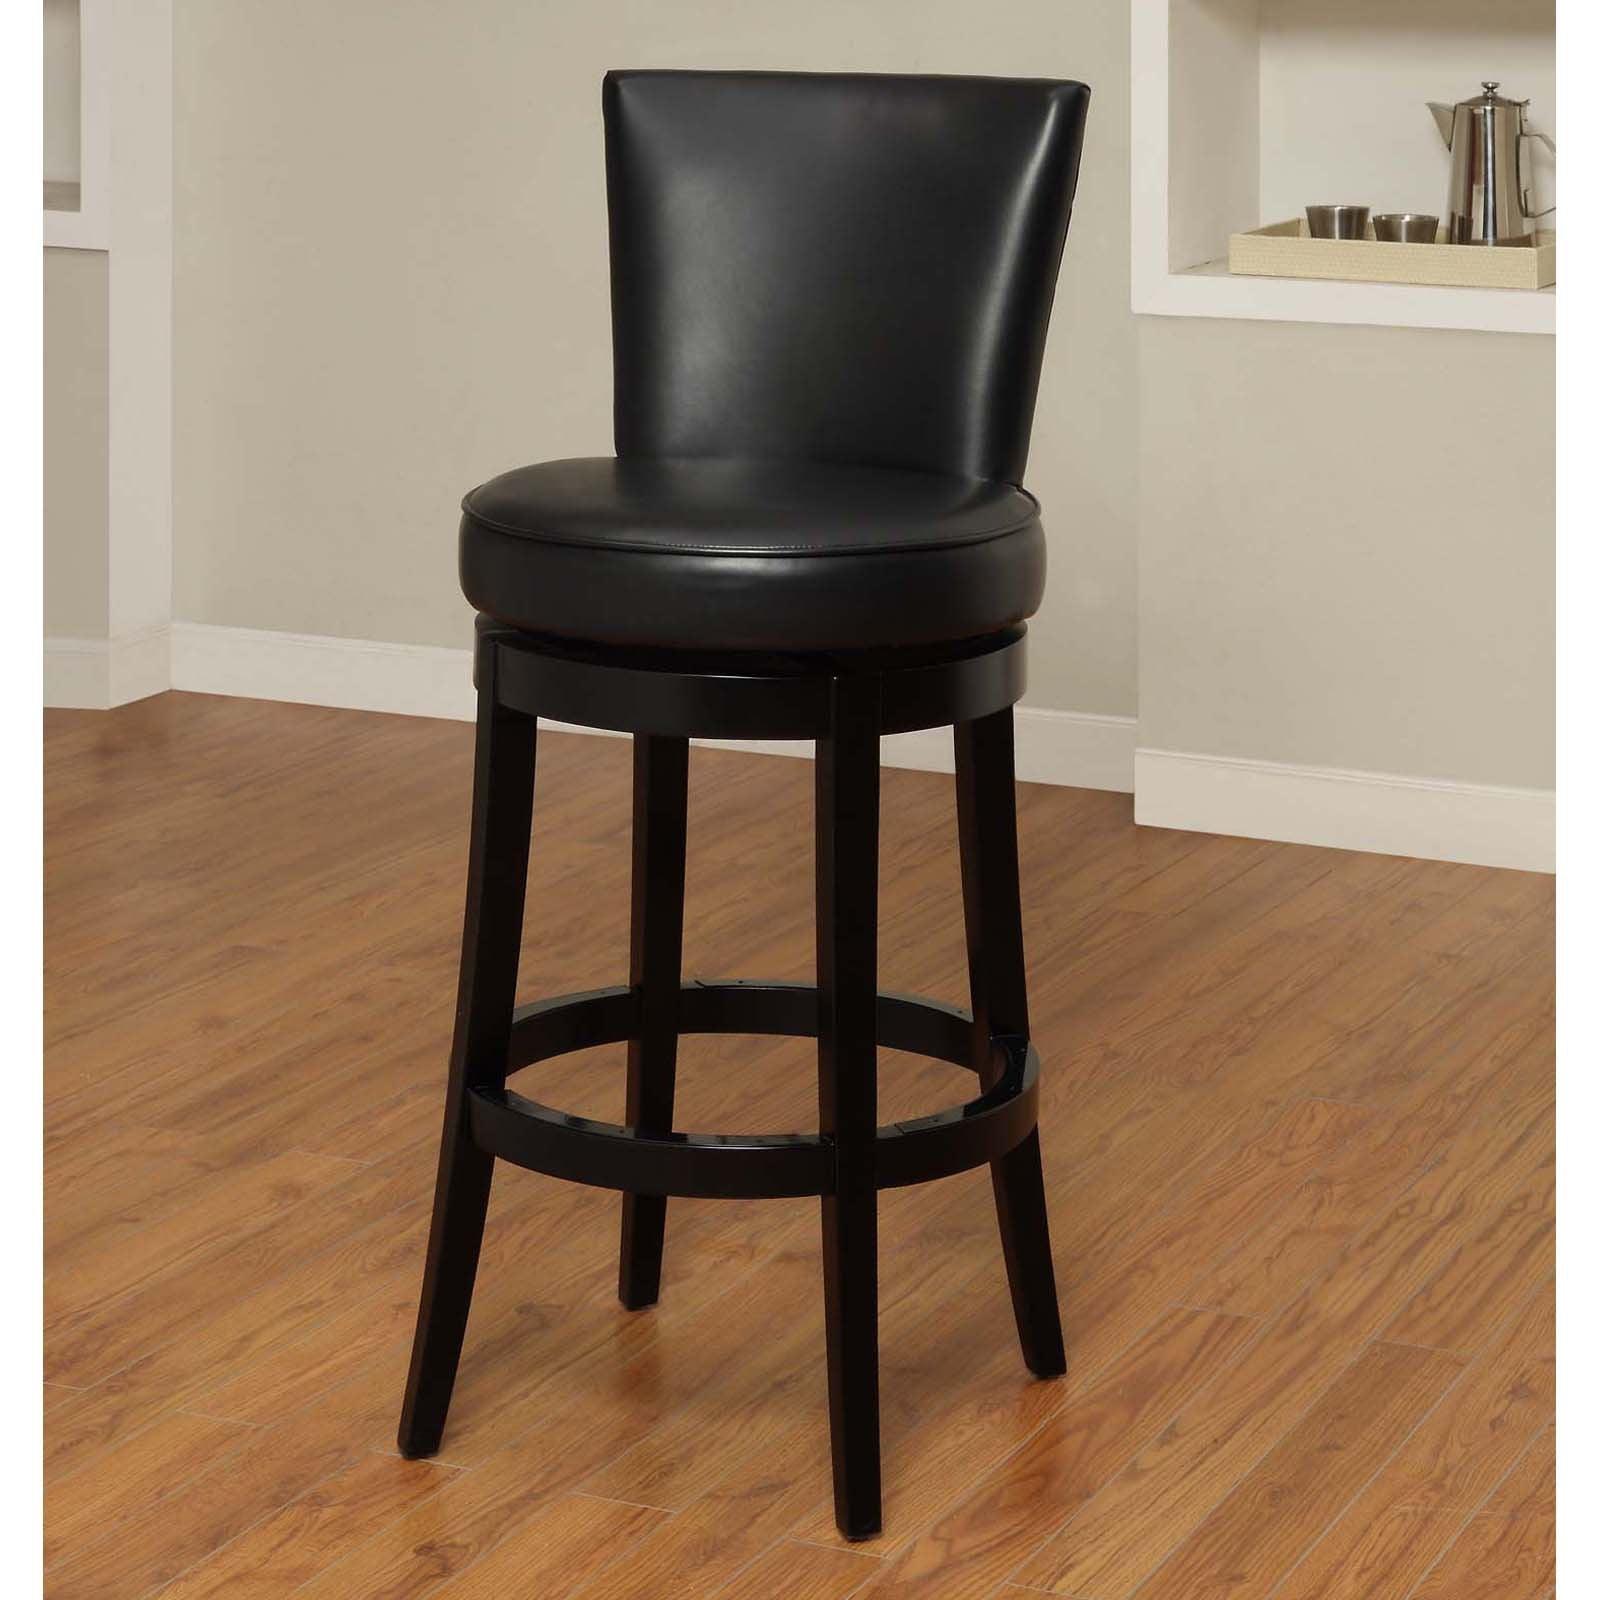 Transitional Black Leather Swivel Barstool with Nailhead Accents